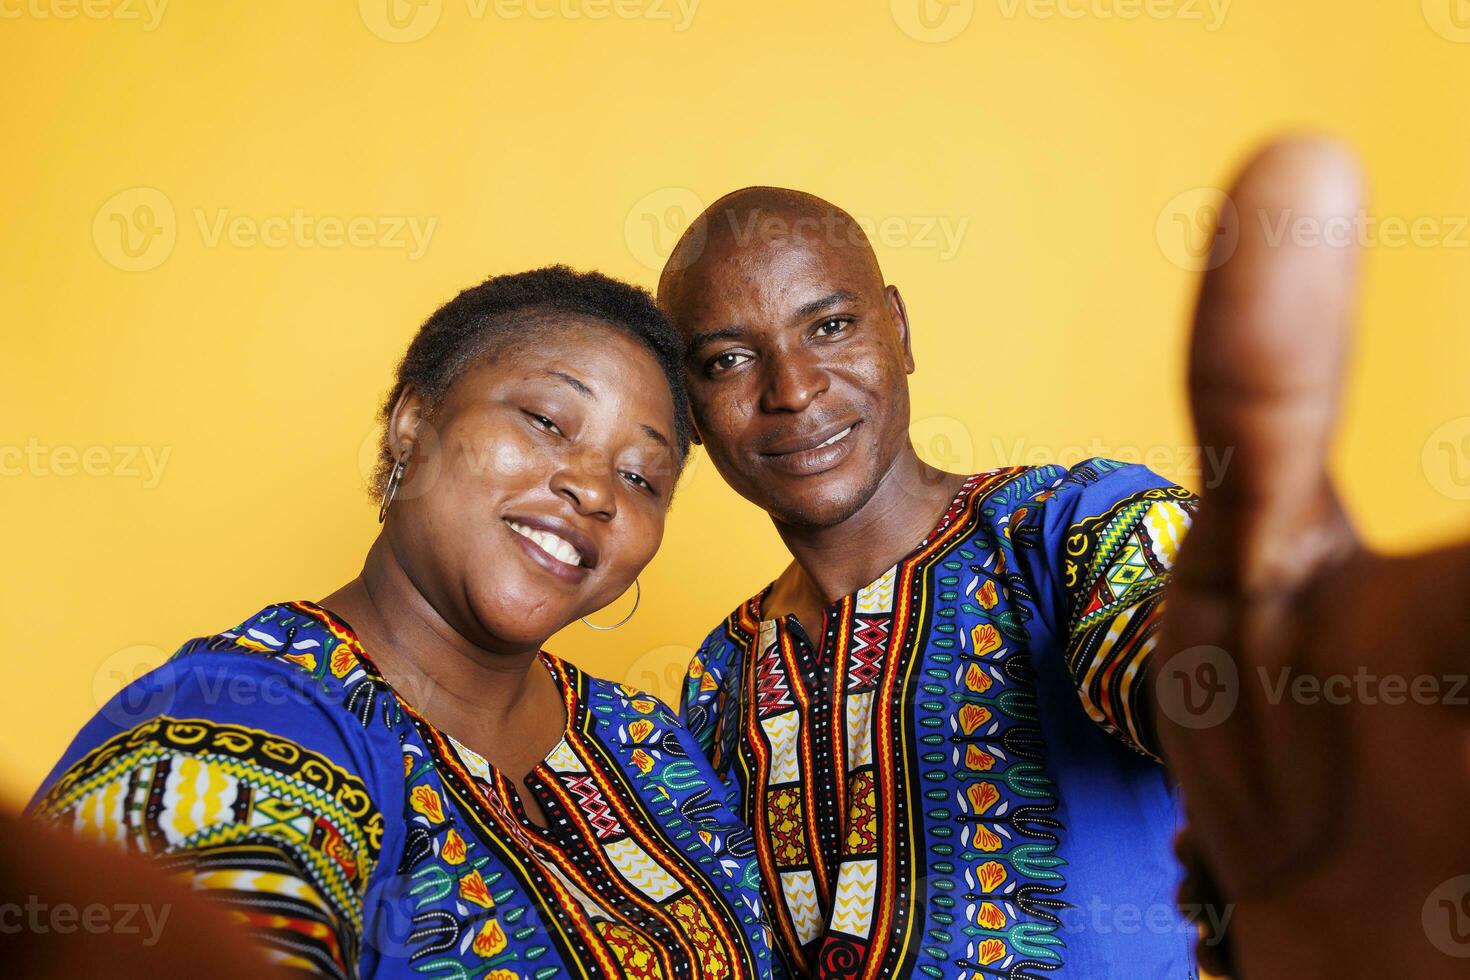 Smiling black man and woman wearing ethnic clothes taking selfie on smartphone and looking at front camera. Cheerful couple holding mobile phone and making photo pov portrait